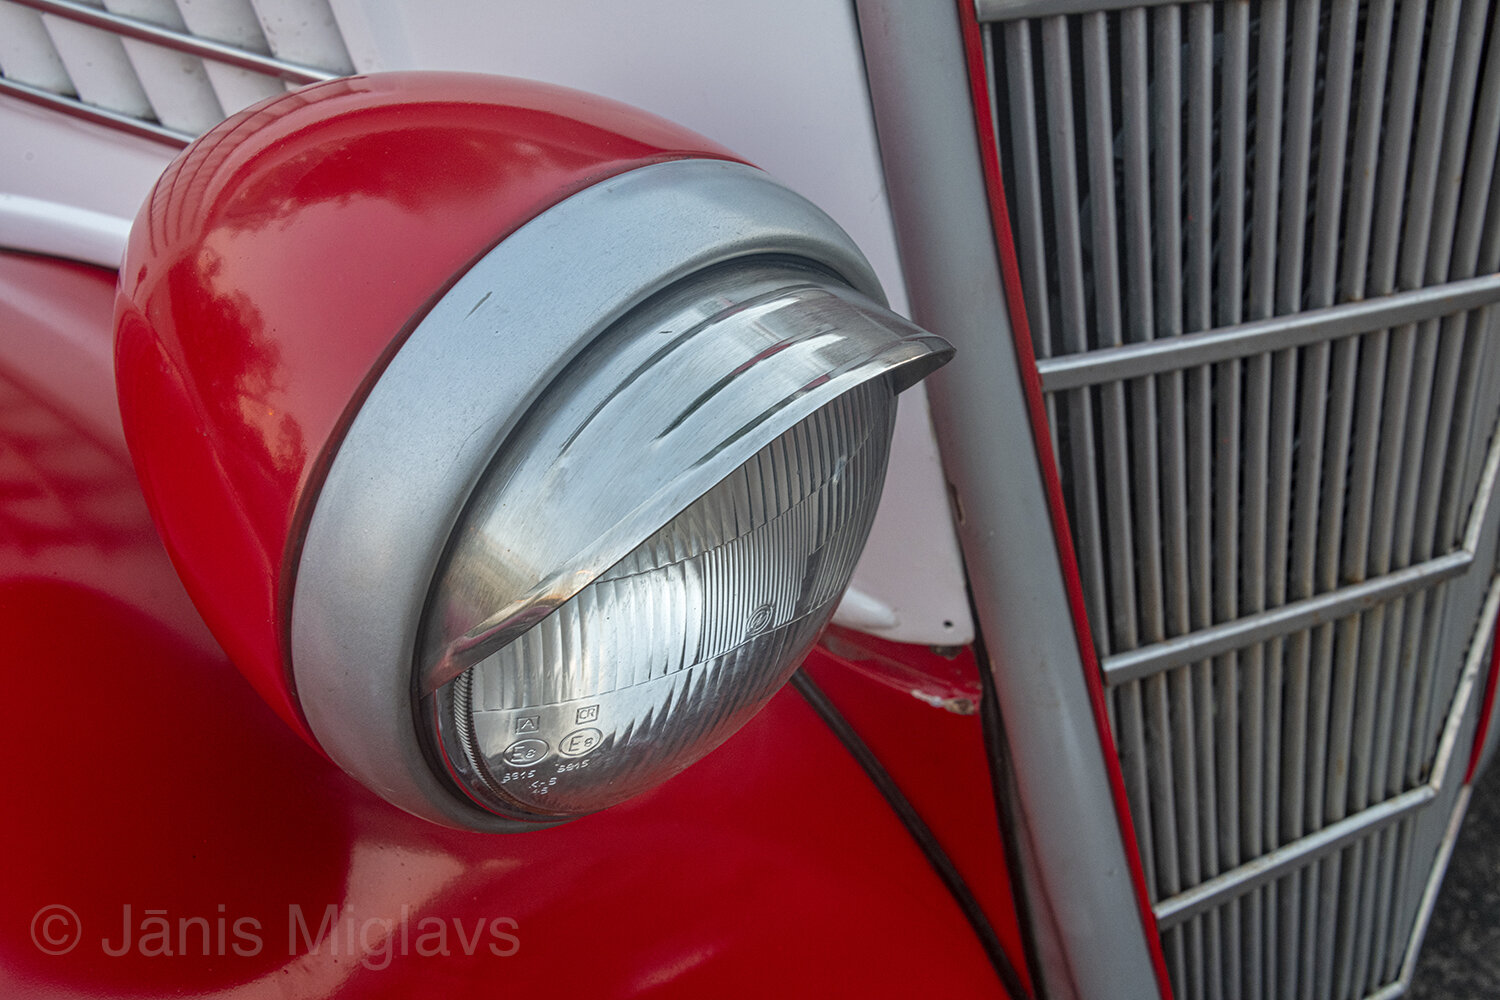 Head light and grill